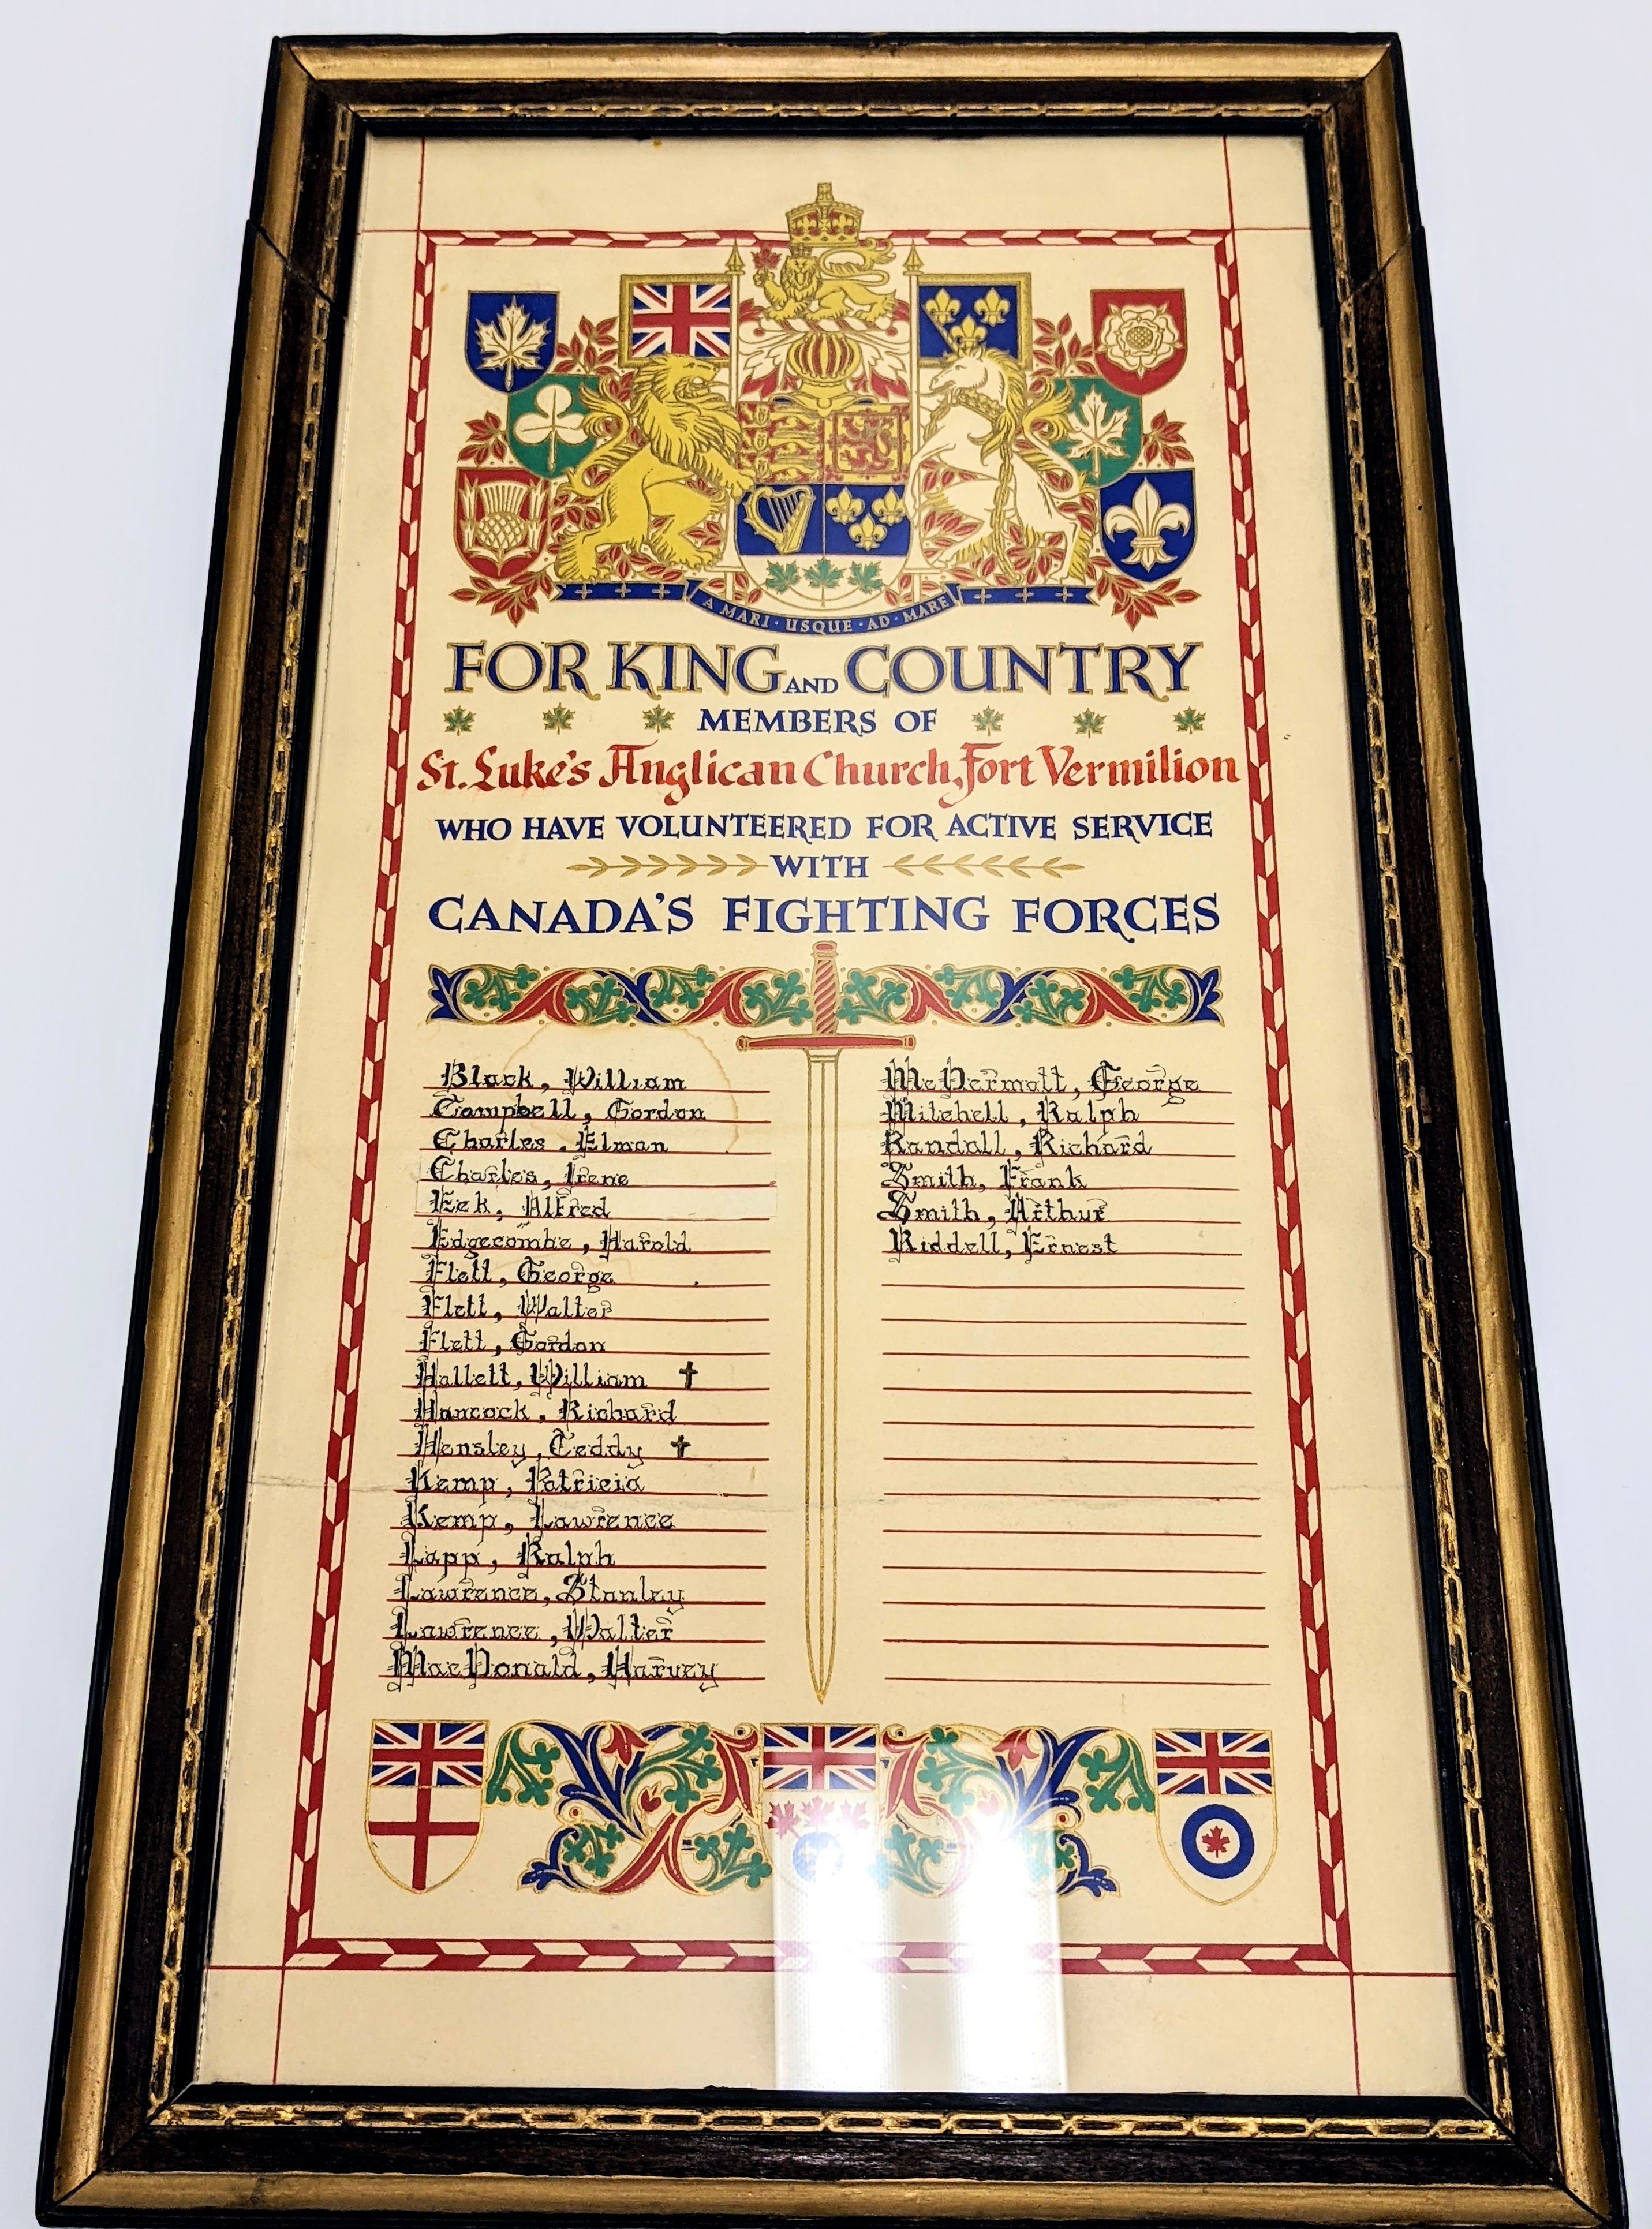 In Honor of Indigenous Veterans day today (Nov. 8 ) and national Remembrance Day on Thursday (Nov. 11) we have chosen this plaque labelling many of the Veterans from Fort Vermilion. Each name is carefully penned in by hand and the small crosses indicate those who were killed in action. The plaque comes from the St. Lukes Anglican church and is by no means a comprehensive list of the veterans from Fort Vermilion Area - if you would like such a list please get in touch!

8/11/2021
2001.13.18 / St. Lukes Anglican Church